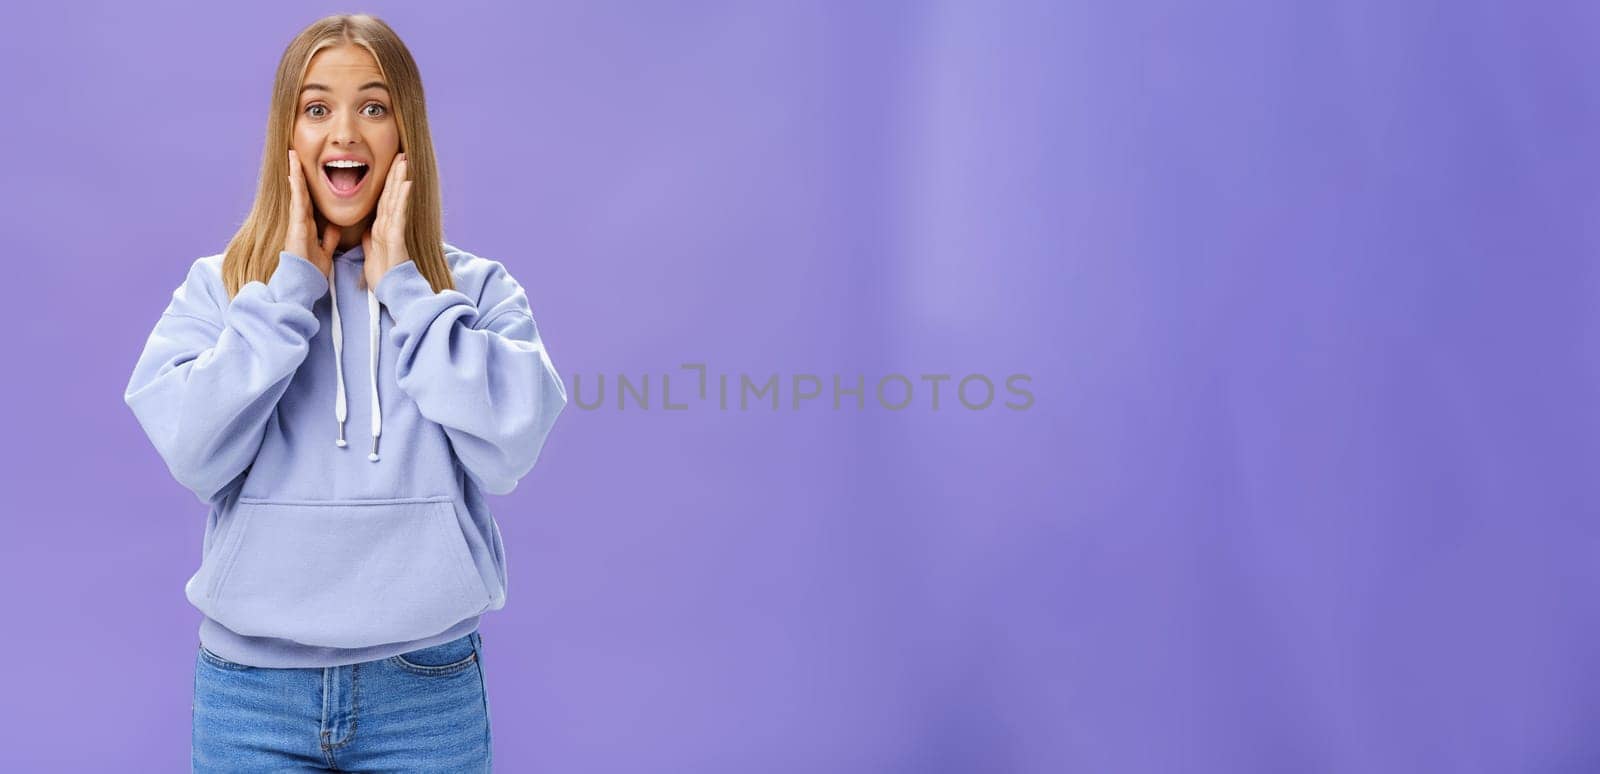 Woman joyfully smiling at camera and touching cheeks as if being surprised and happy see friend meeting person in airport feeling cheerful to reunite standing over purple background in cute hoodie. Emotions concept